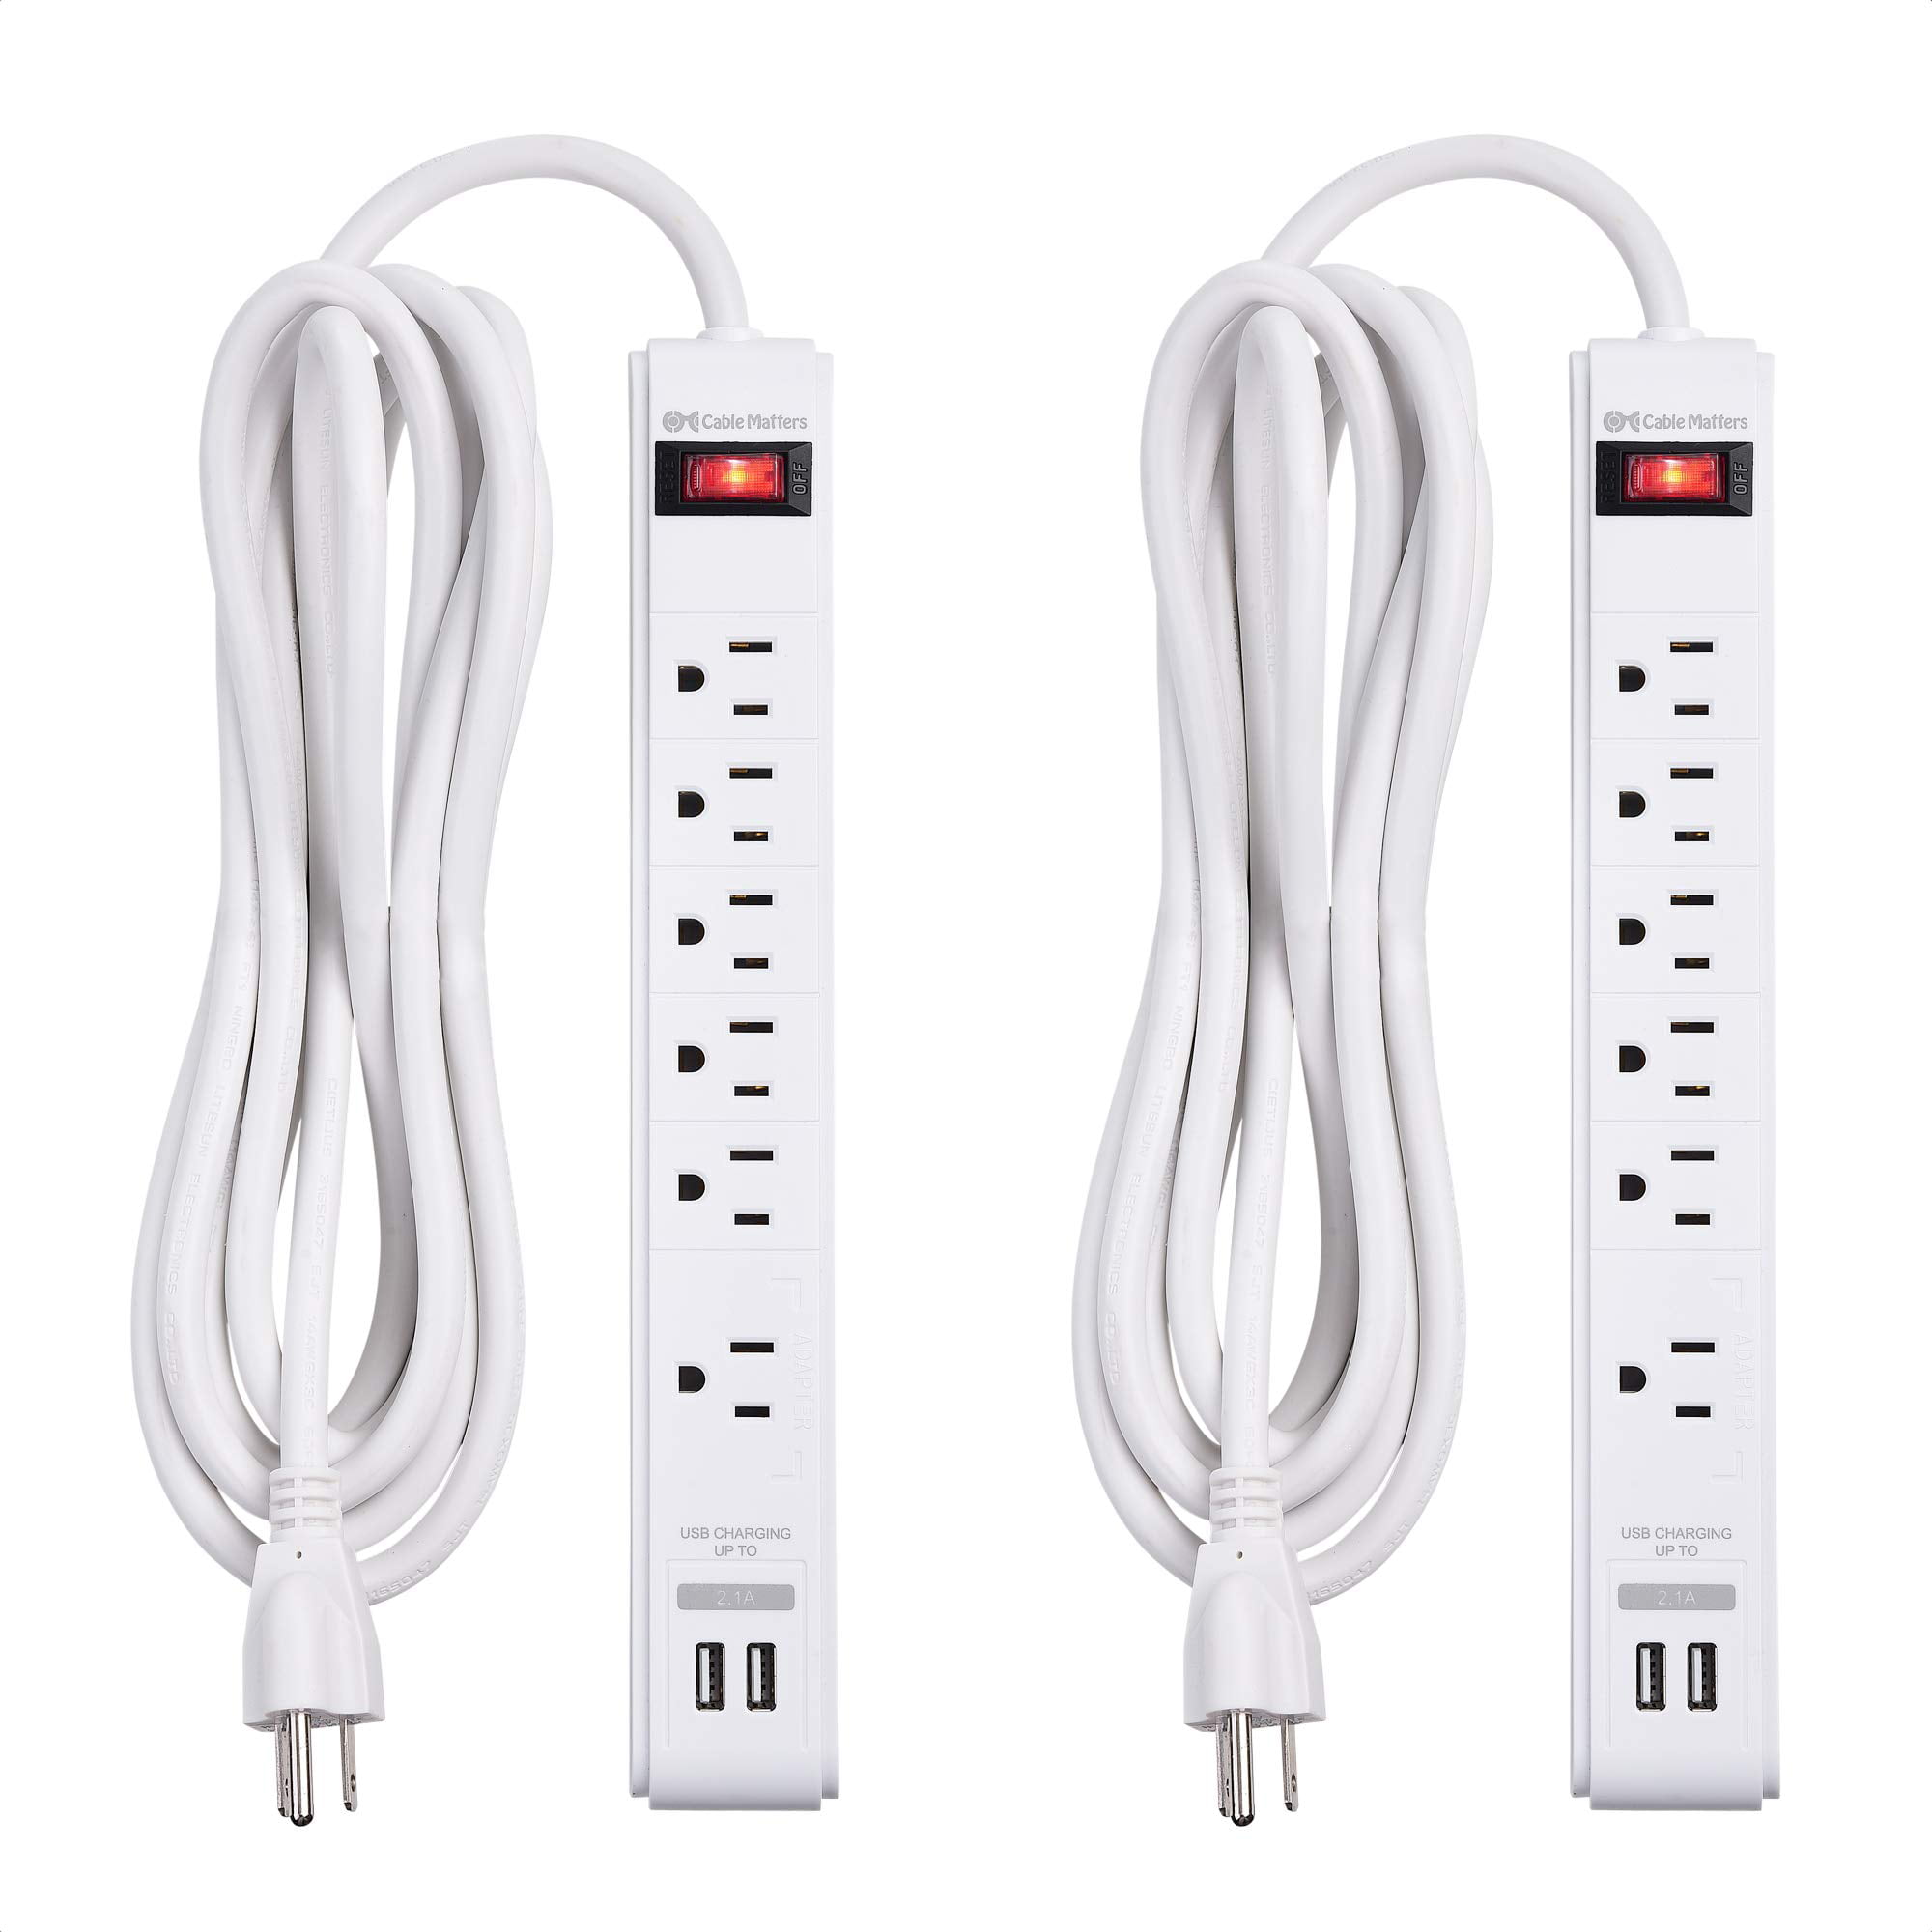 Cable Matters 2-Pack 6 Outlet Surge Protector Power Strip with USB Charging 